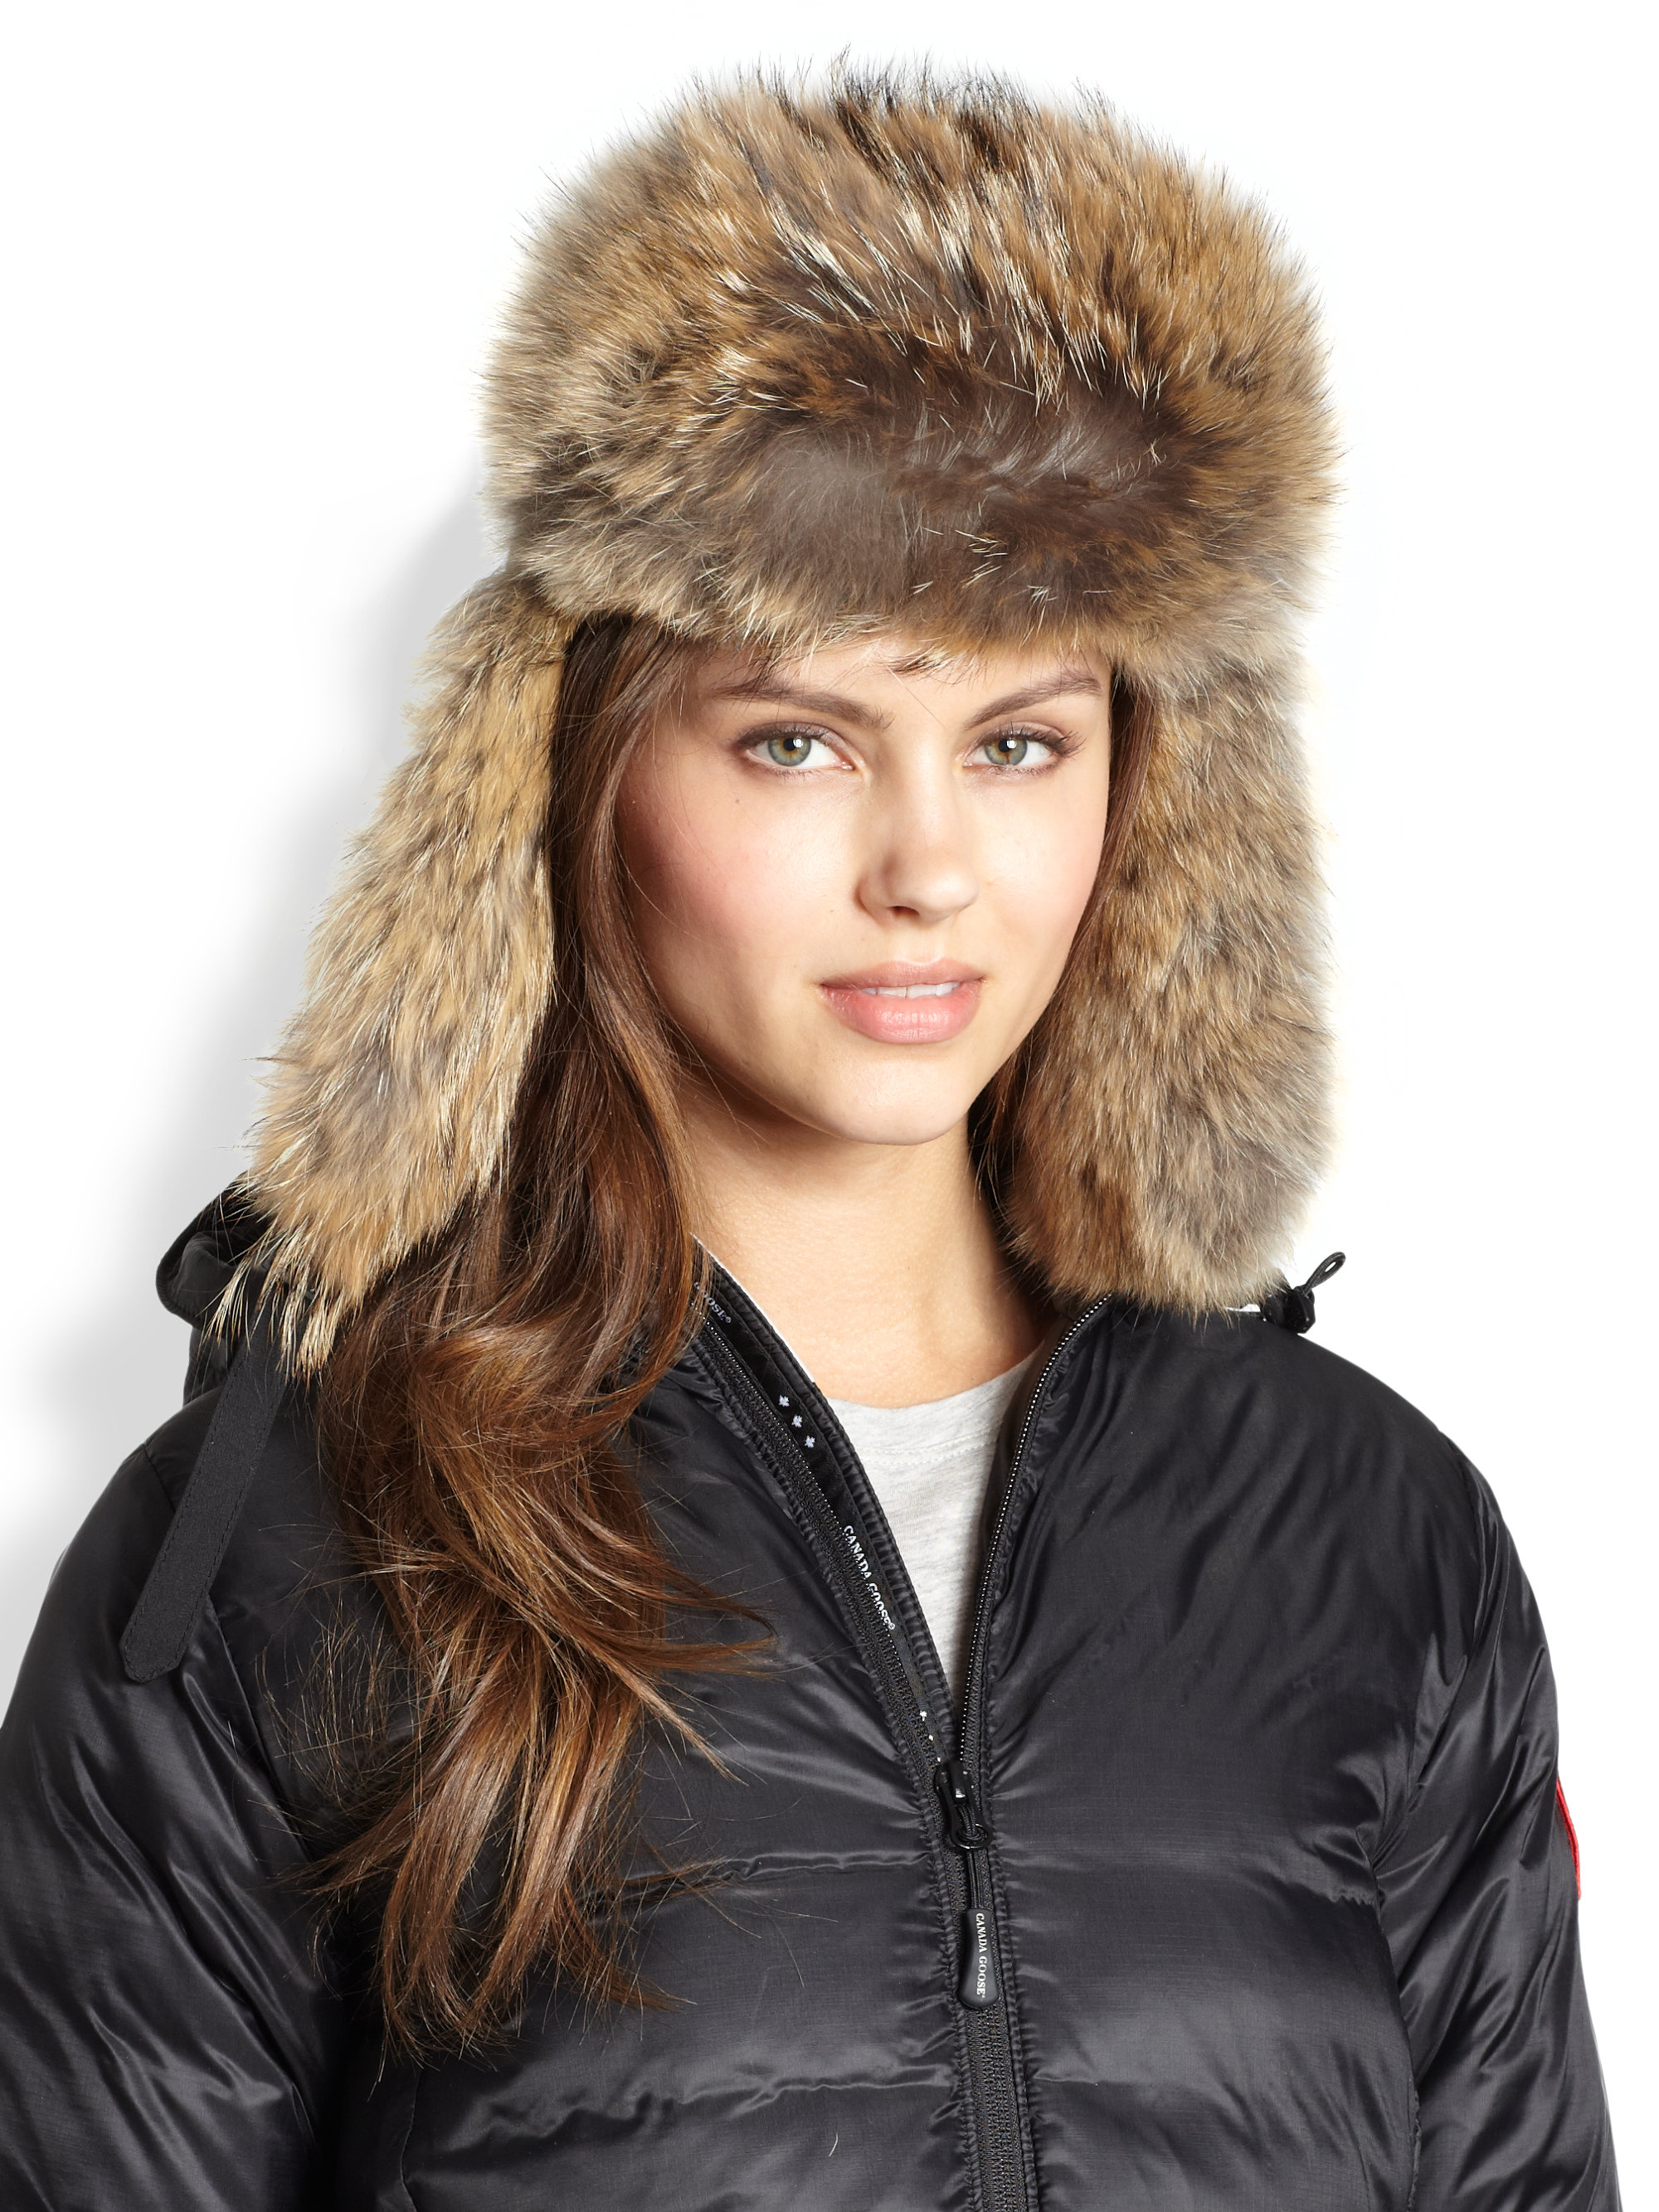 Lyst - Canada Goose Fur-Trimmed, Down Aviator Hat in Brown